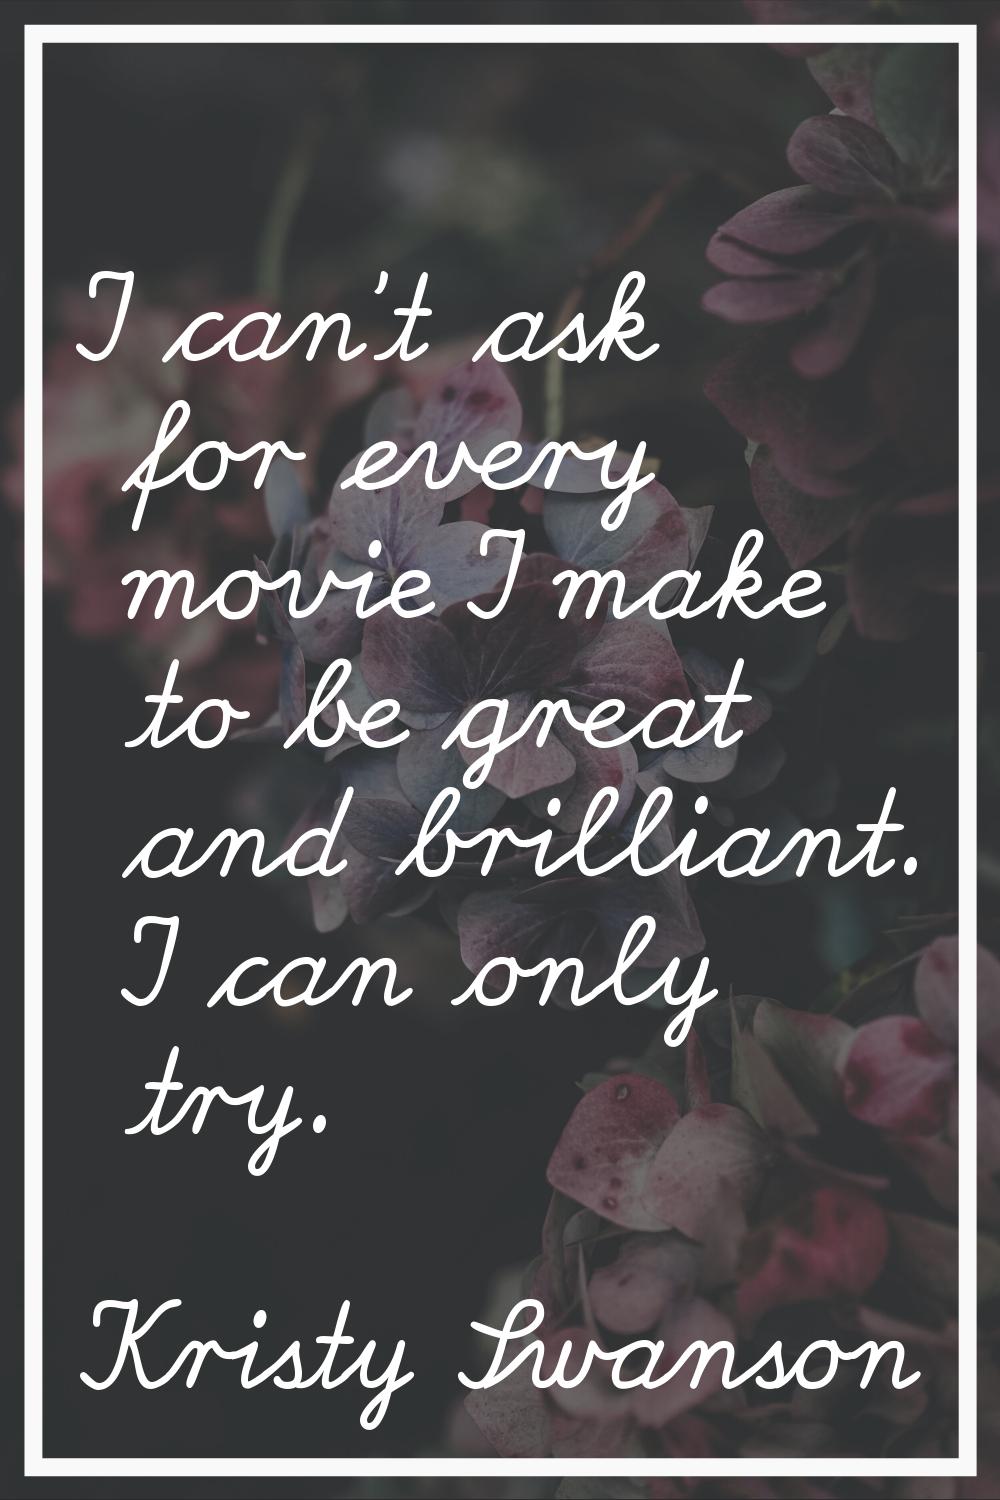 I can't ask for every movie I make to be great and brilliant. I can only try.